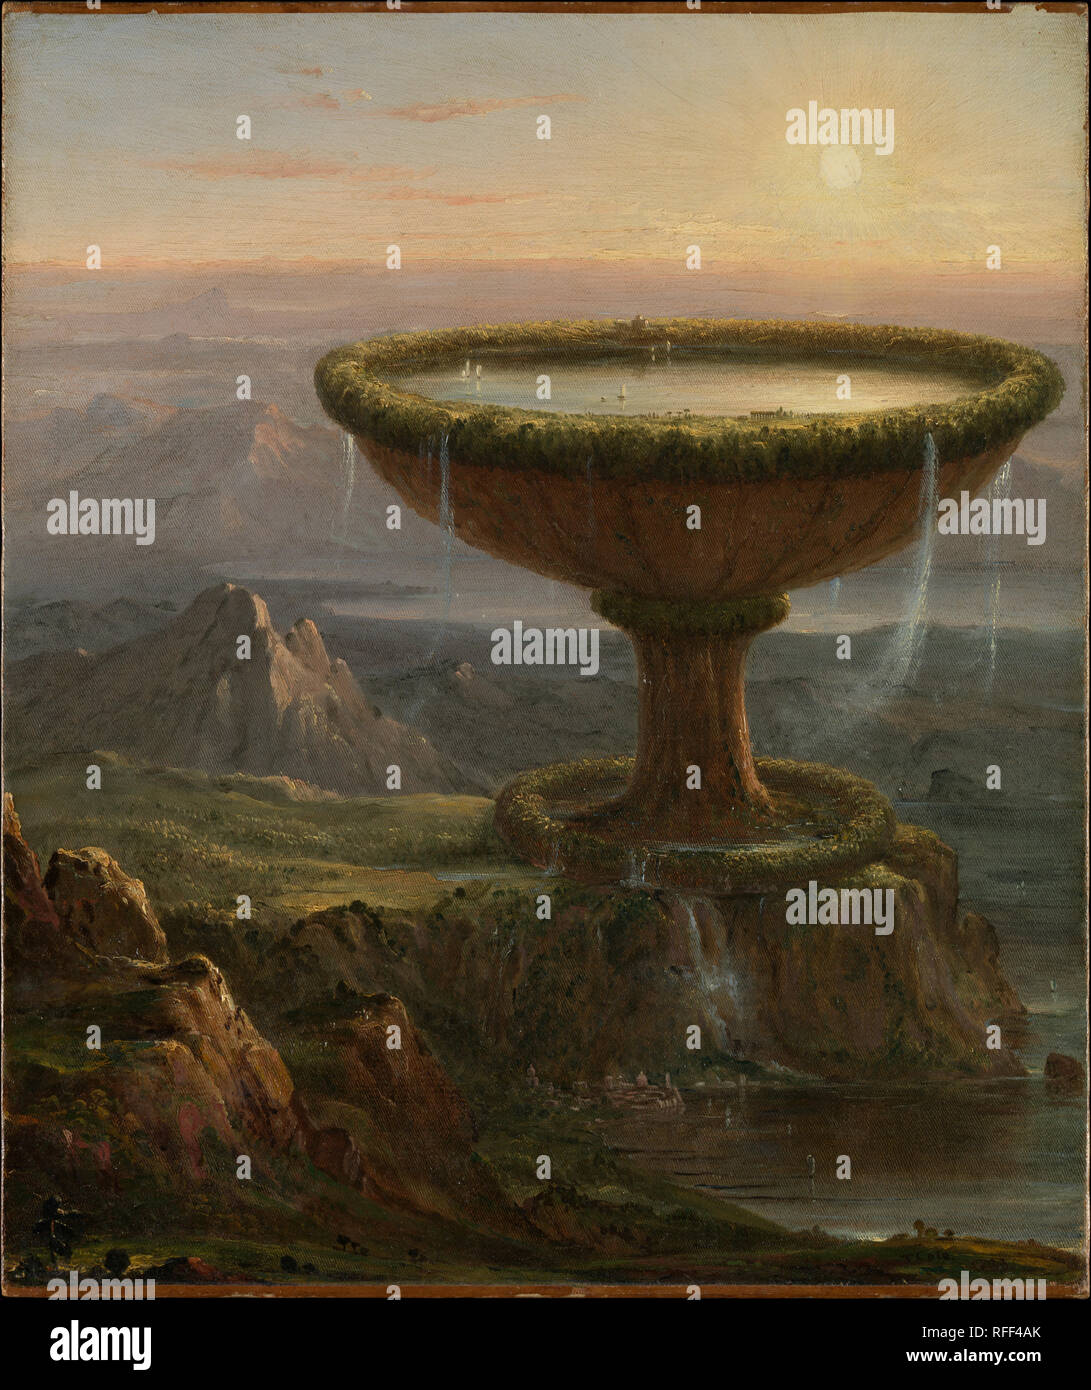 The Titan's Goblet. Artist: Thomas Cole (American, Lancashire 1801-1848 Catskill, New York). Dimensions: 19 3/8 x 16 1/8 in. (49.2 x 41 cm). Date: 1833.  The culmination of Cole's romantic fantasies, this work echoes the artist's other works of the period in its Italian derived scenery and its attempt to illustrate themes dealing with the grandeur of the past, the passage of time, and the encroachment of nature. Rejected by  Cole's patron, Luman Reed, and subsequently owned by the artist John  M. Falconer, the work defies full explanation. The massive, vegetation encrusted goblet around whose  Stock Photo